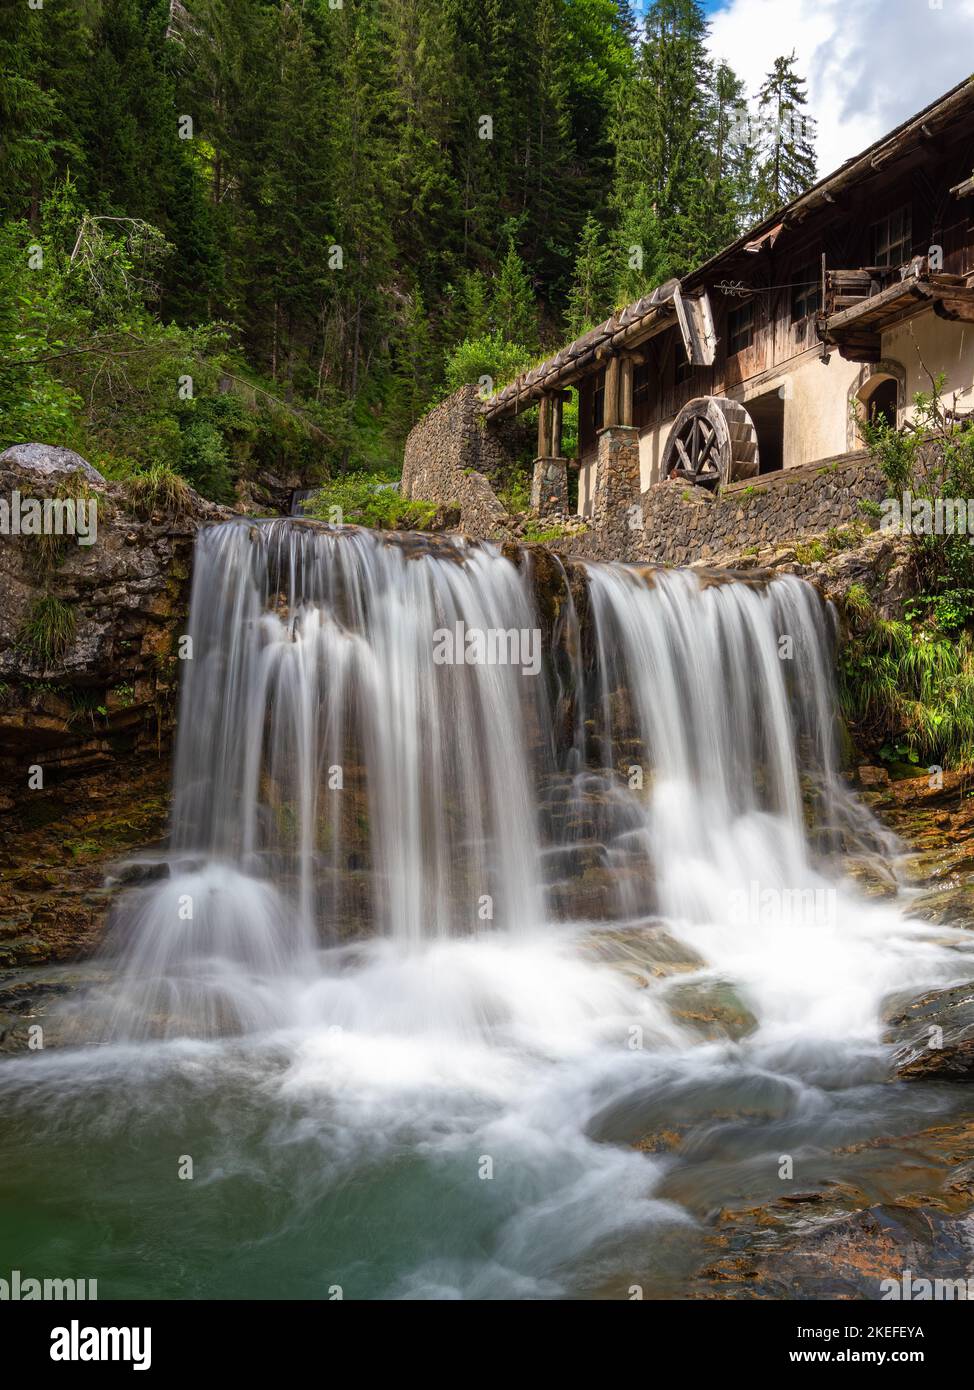 Waterfall and abandoned water mill in Sappada, an alpine village on the edge of the Italian Dolomites Stock Photo